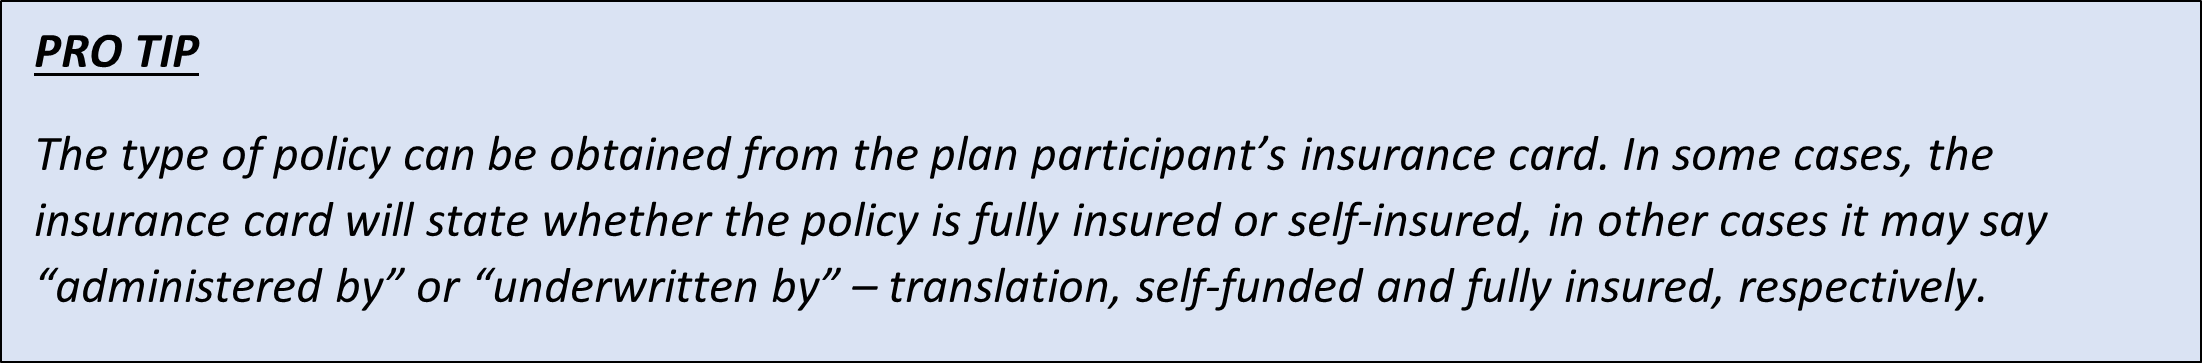 The type of policy (a patient has) can be obtained from the plan participant's insurance card.